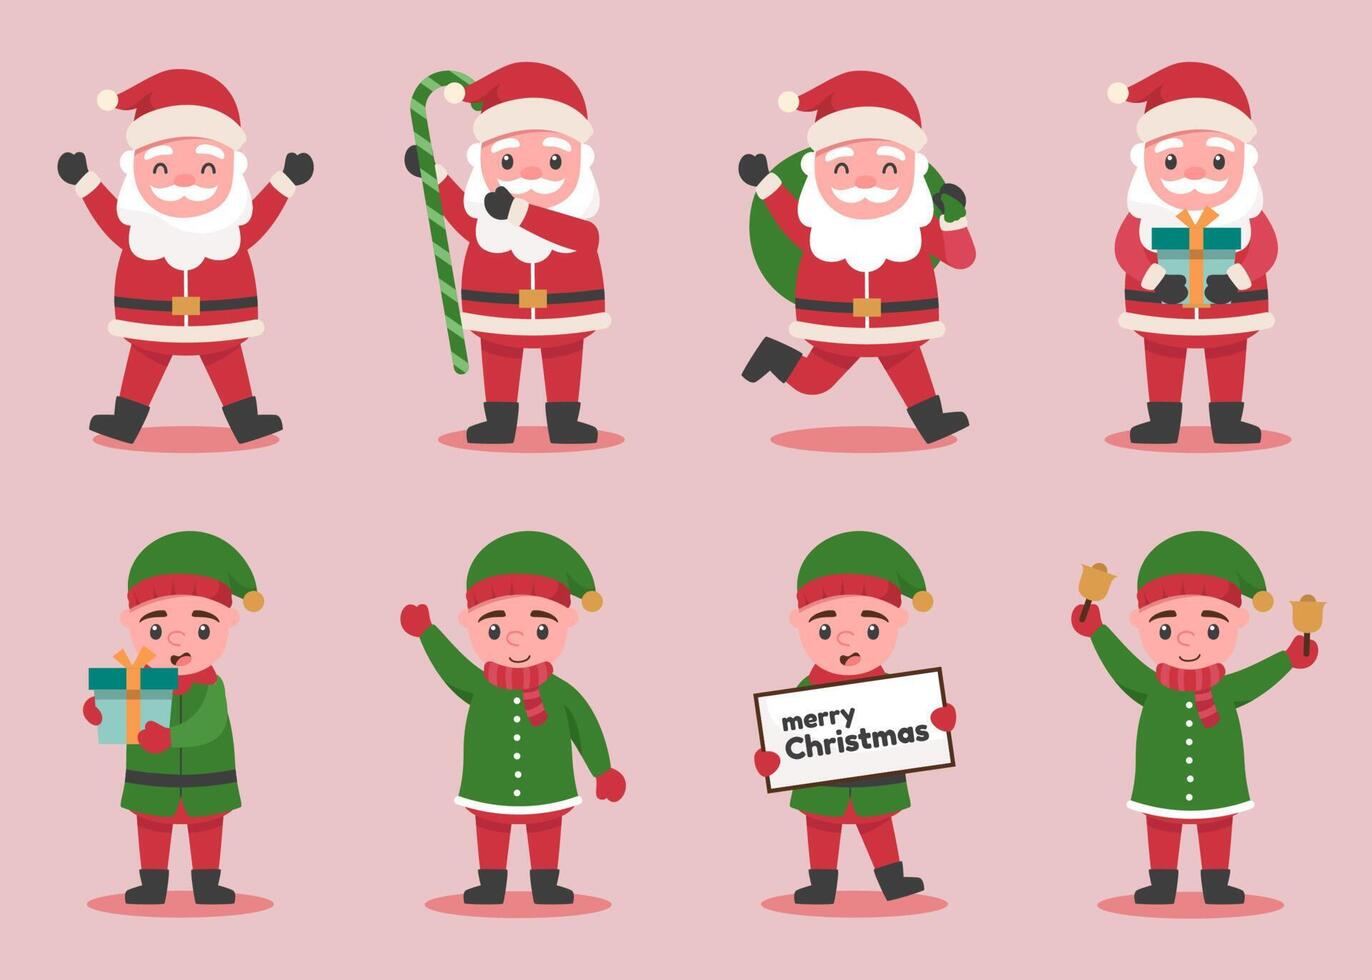 Santa Claus and elf characters in various poses and scenes. vector